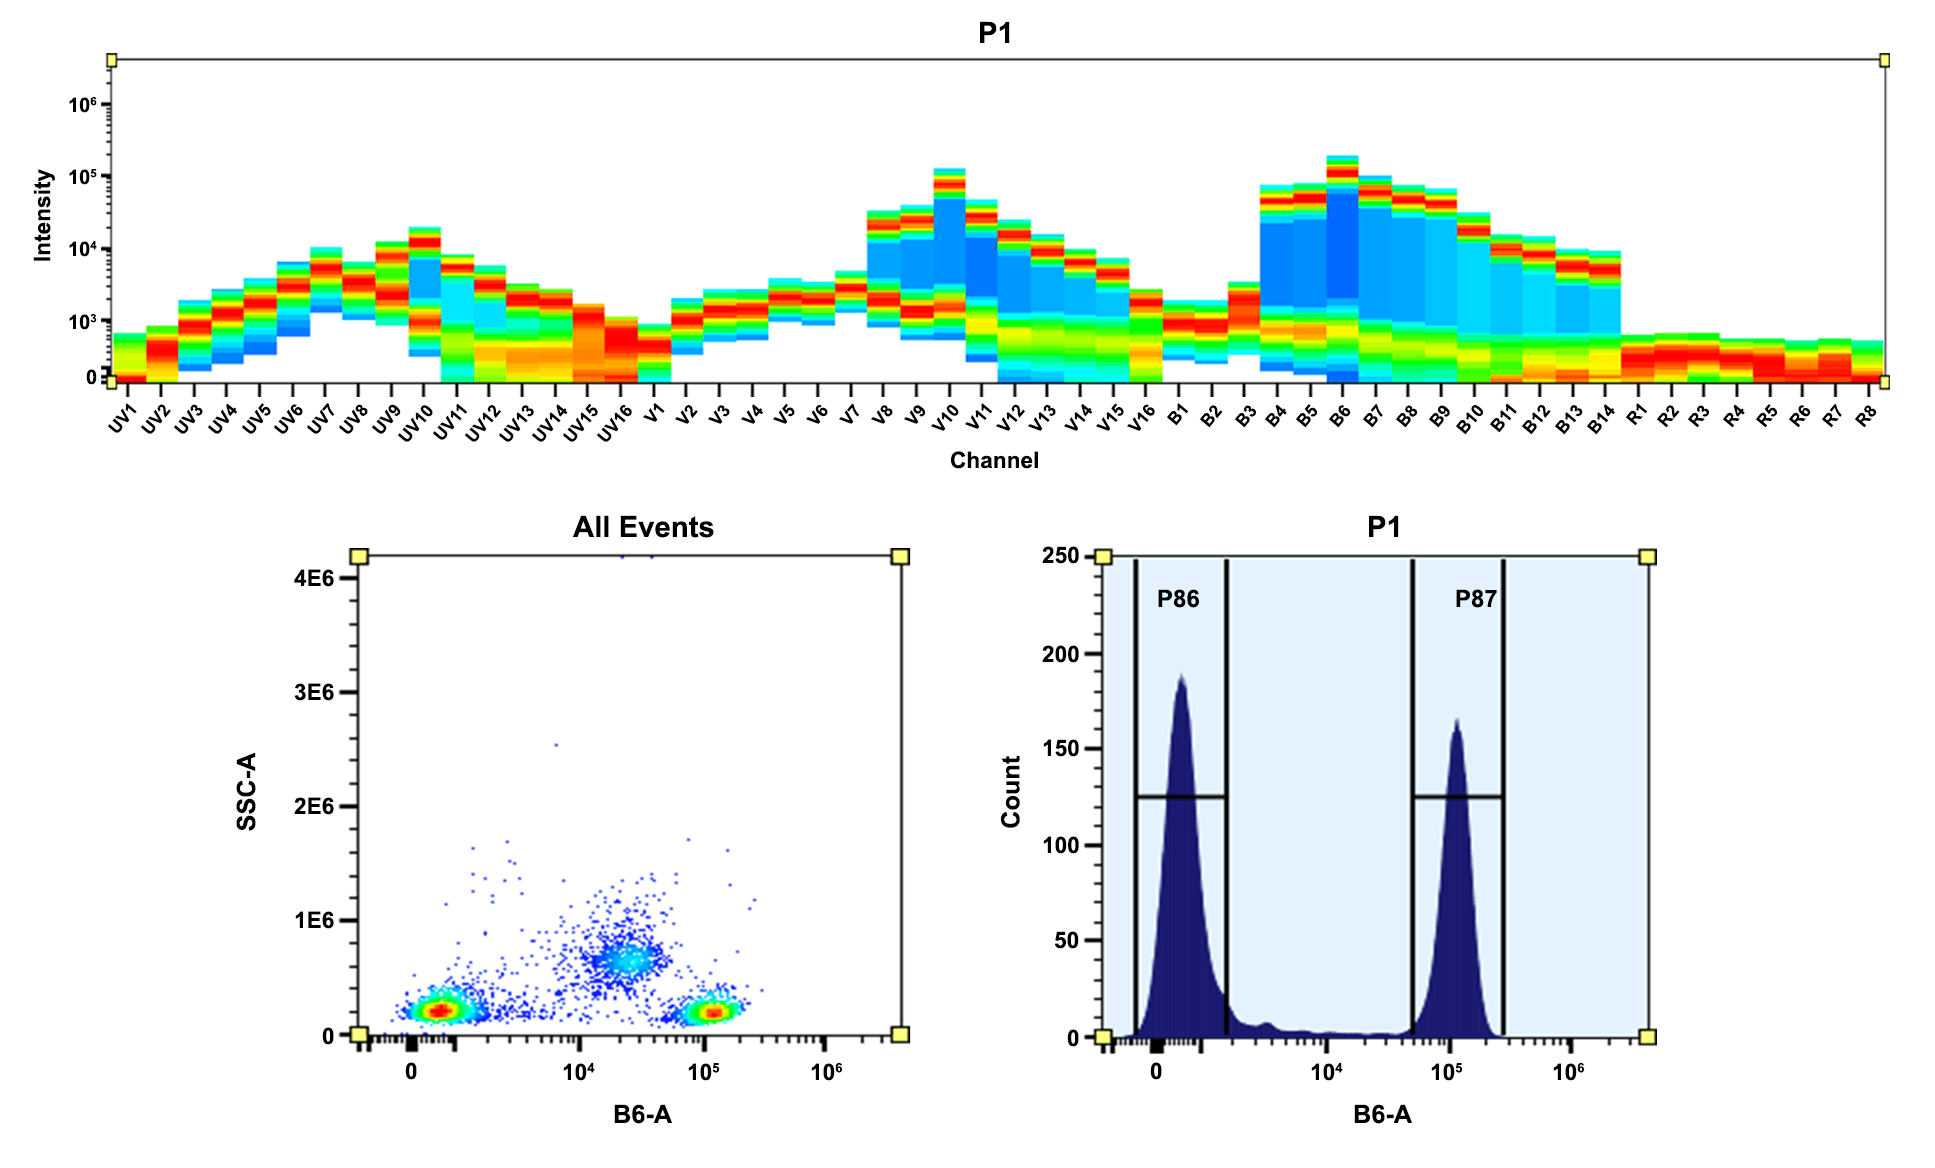 Top) Spectral pattern was generated using a 4-laser spectral cytometer. Spatially offset lasers (355 nm, 405 nm, 488 nm, and 640 nm) were used to create four distinct emission profiles, then, when combined, yielded the overall spectral signature. Bottom) Flow cytometry analysis of PBMC stained with PE anti-human CD4 *SK3* conjugate. The fluorescence signal was monitored using an Aurora spectral flow cytometer in the PE-specific B6-A channel. The PE conjugates were prepared using Buccutite™ Rapid PE Antibody Labeling Kit *Production Scale* (Cat# 5405).